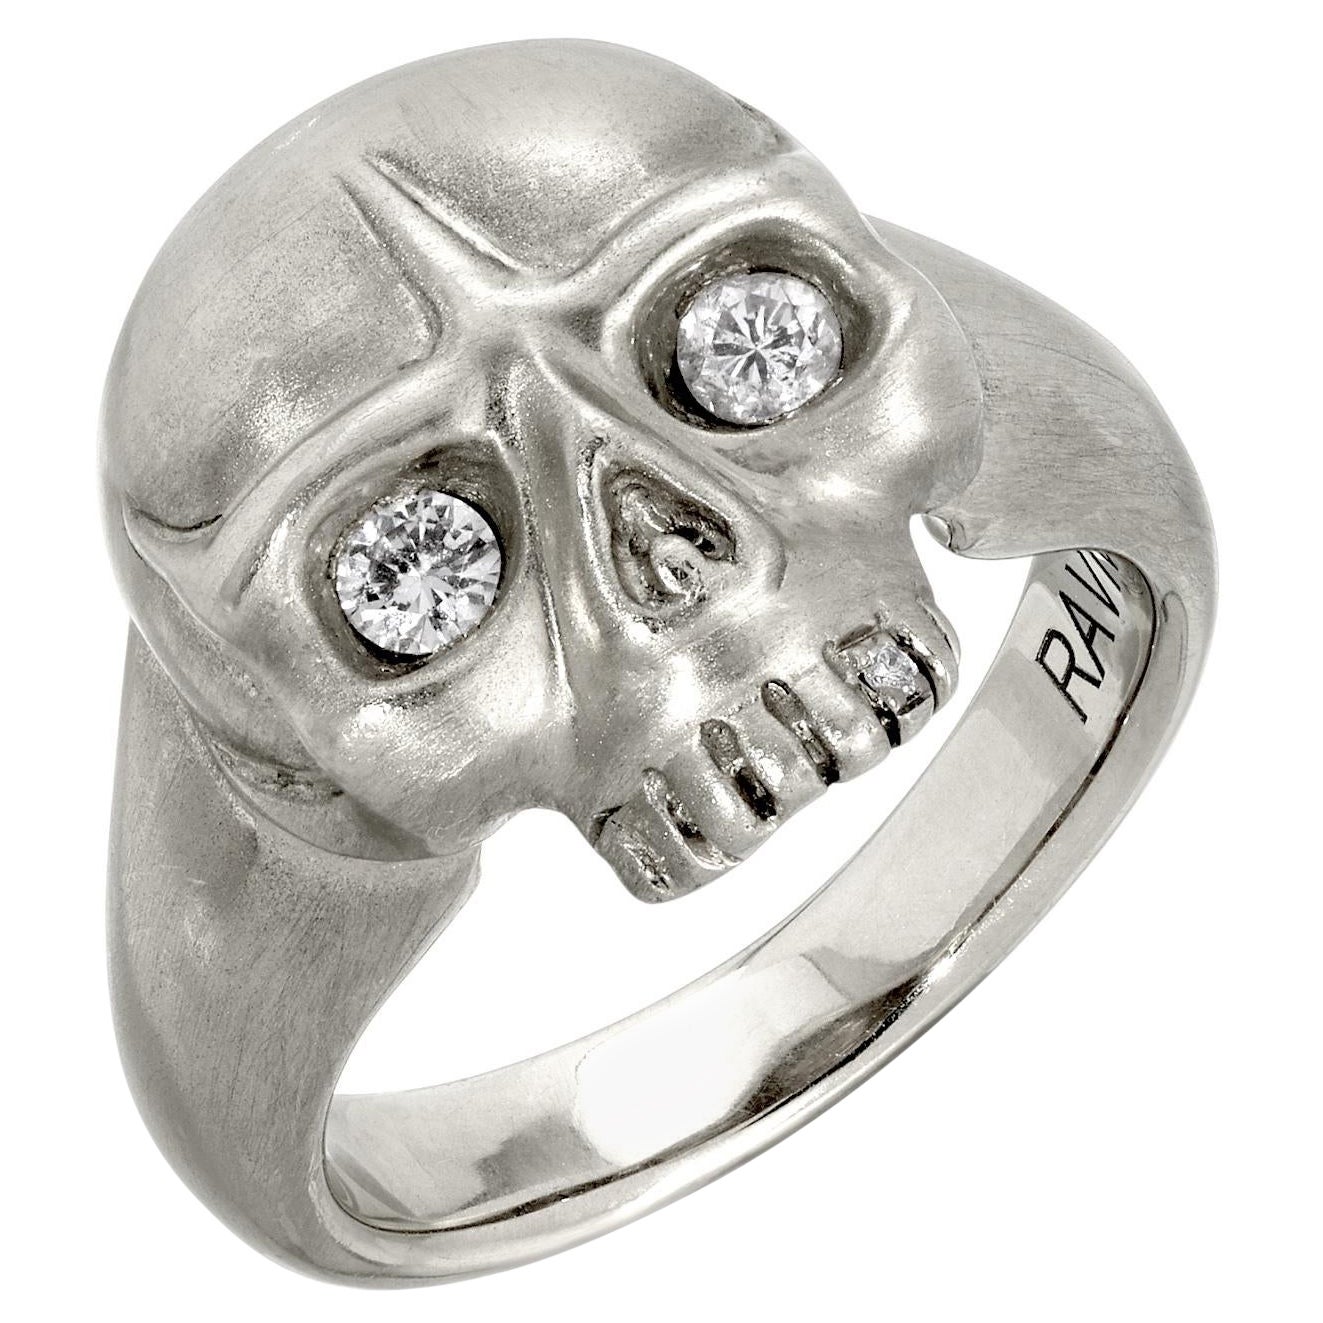 House of RAVN, Jawless Sterling Silver Hand Carved Small Skull Ring, Diamonds For Sale